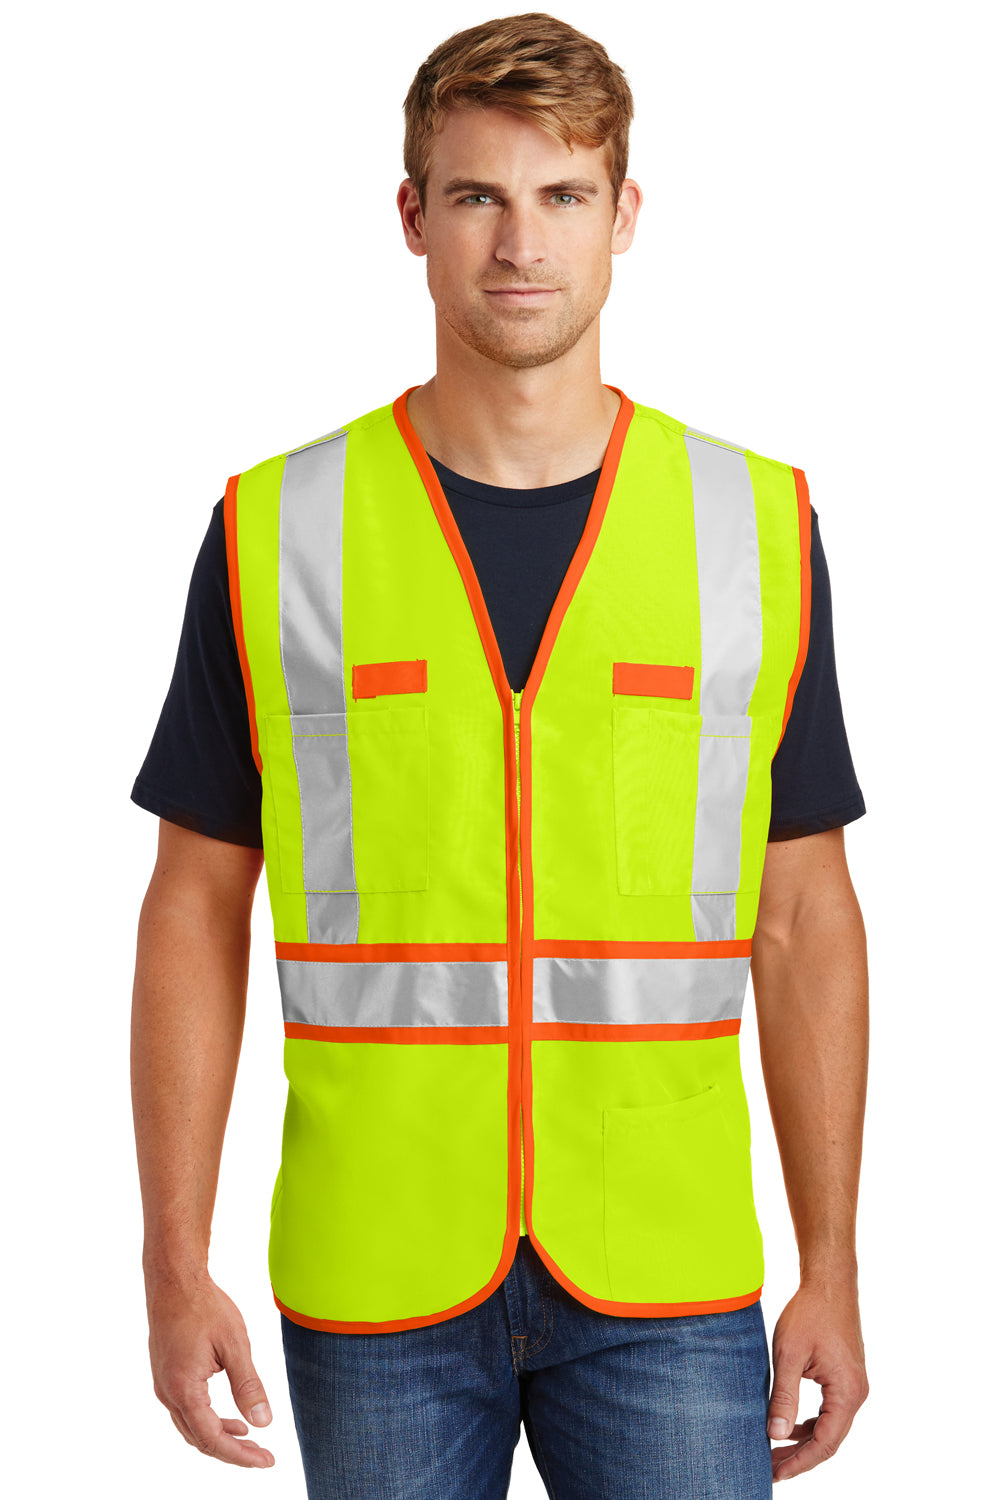 CornerStone CSV407 Mens ANSI 107 Class 2 Safety Full Zip Vest Safety Yellow Front